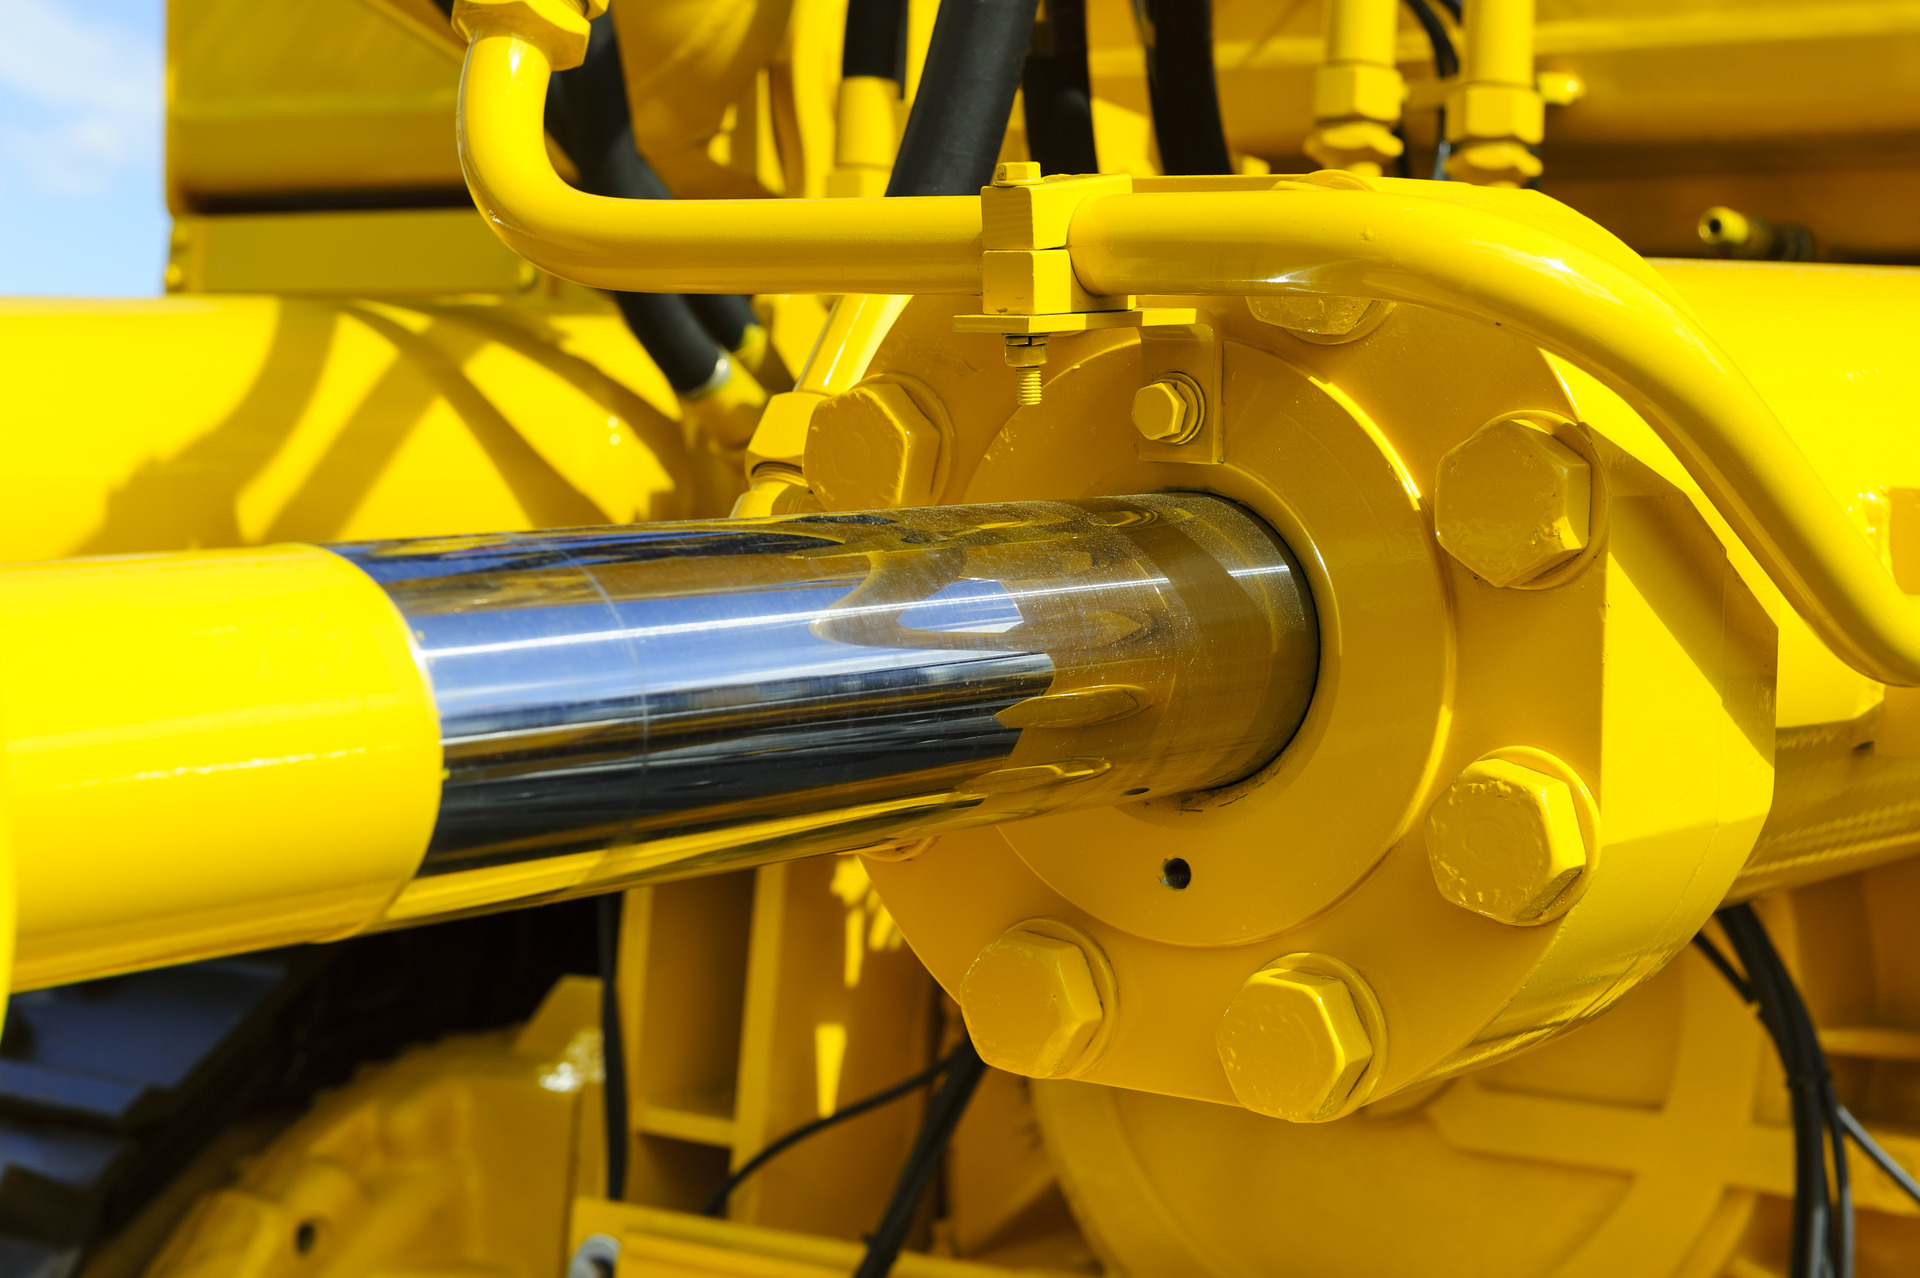 Hydraulic piston system for bulldozers, tractors, excavators. hrome plated cylinder shaft of yellow machine